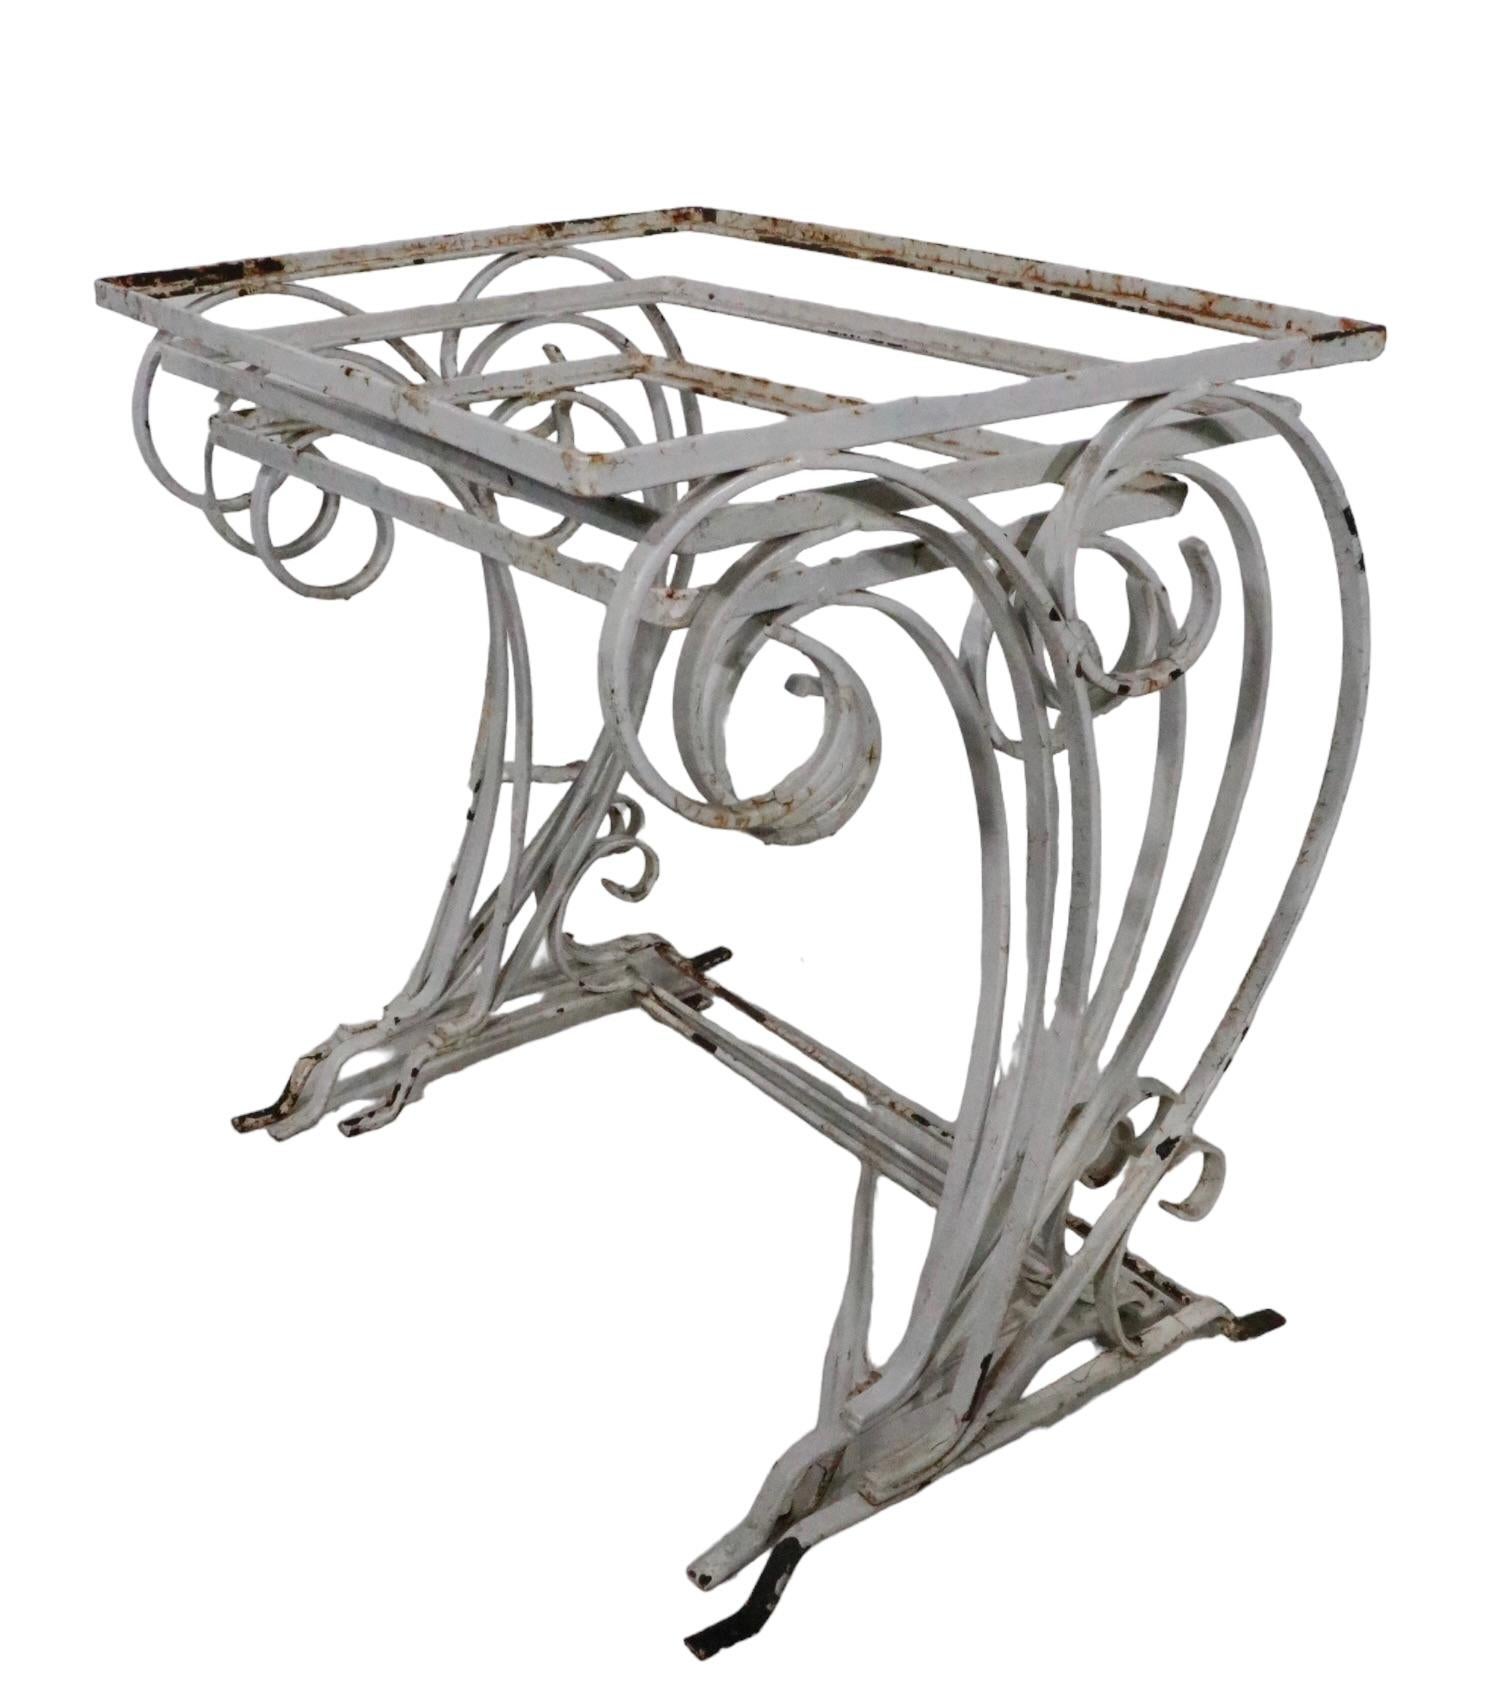 American Nest of 3 Art Deco Mid Century Wrought Iron Patio Garden Tables by Salterini For Sale